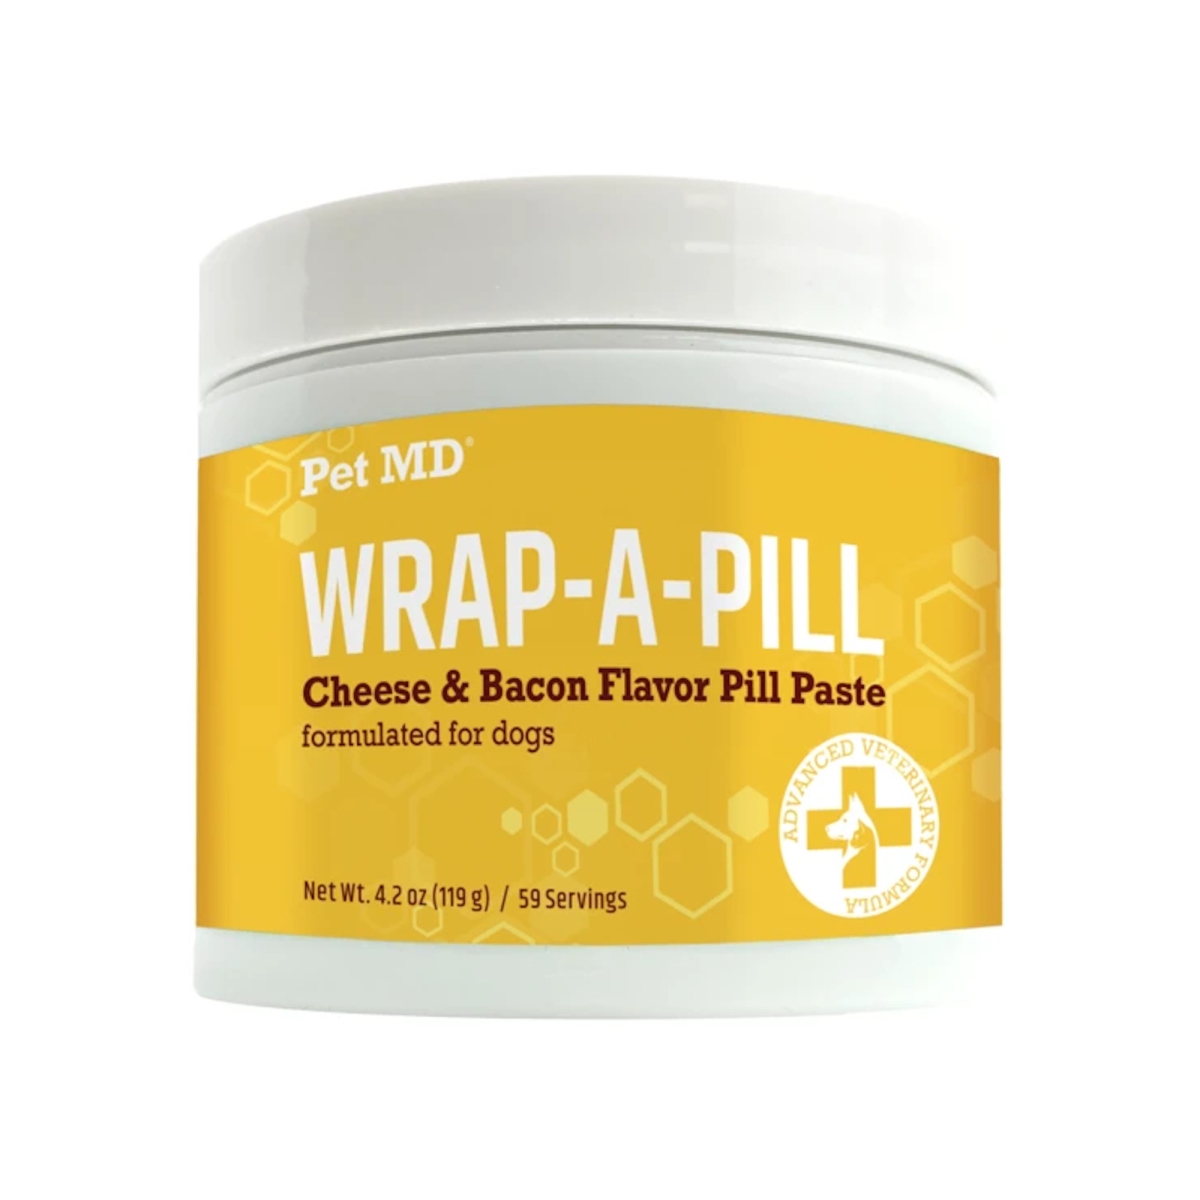 Picture of Pet MD 850012848301 4.2 oz Wrap-A-Pill Cheese & Bacon Flavor Pill Paste for Dogs